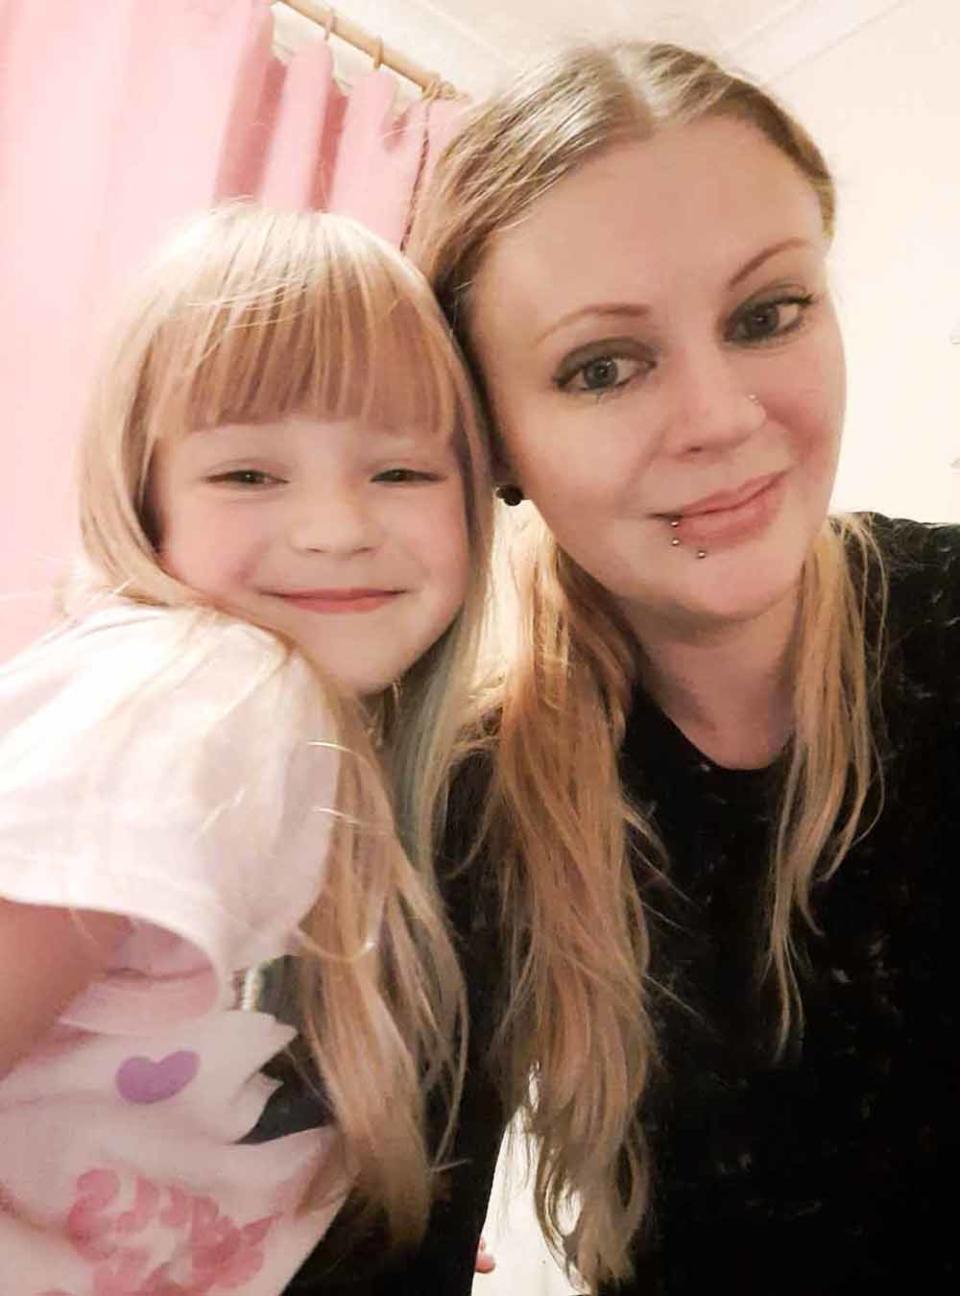 Becky, pictured here with Lexi four months after her diagnosis, has raised £16,000 for private treatment in the hope of prolonging her life (Collect/PA Real Life).